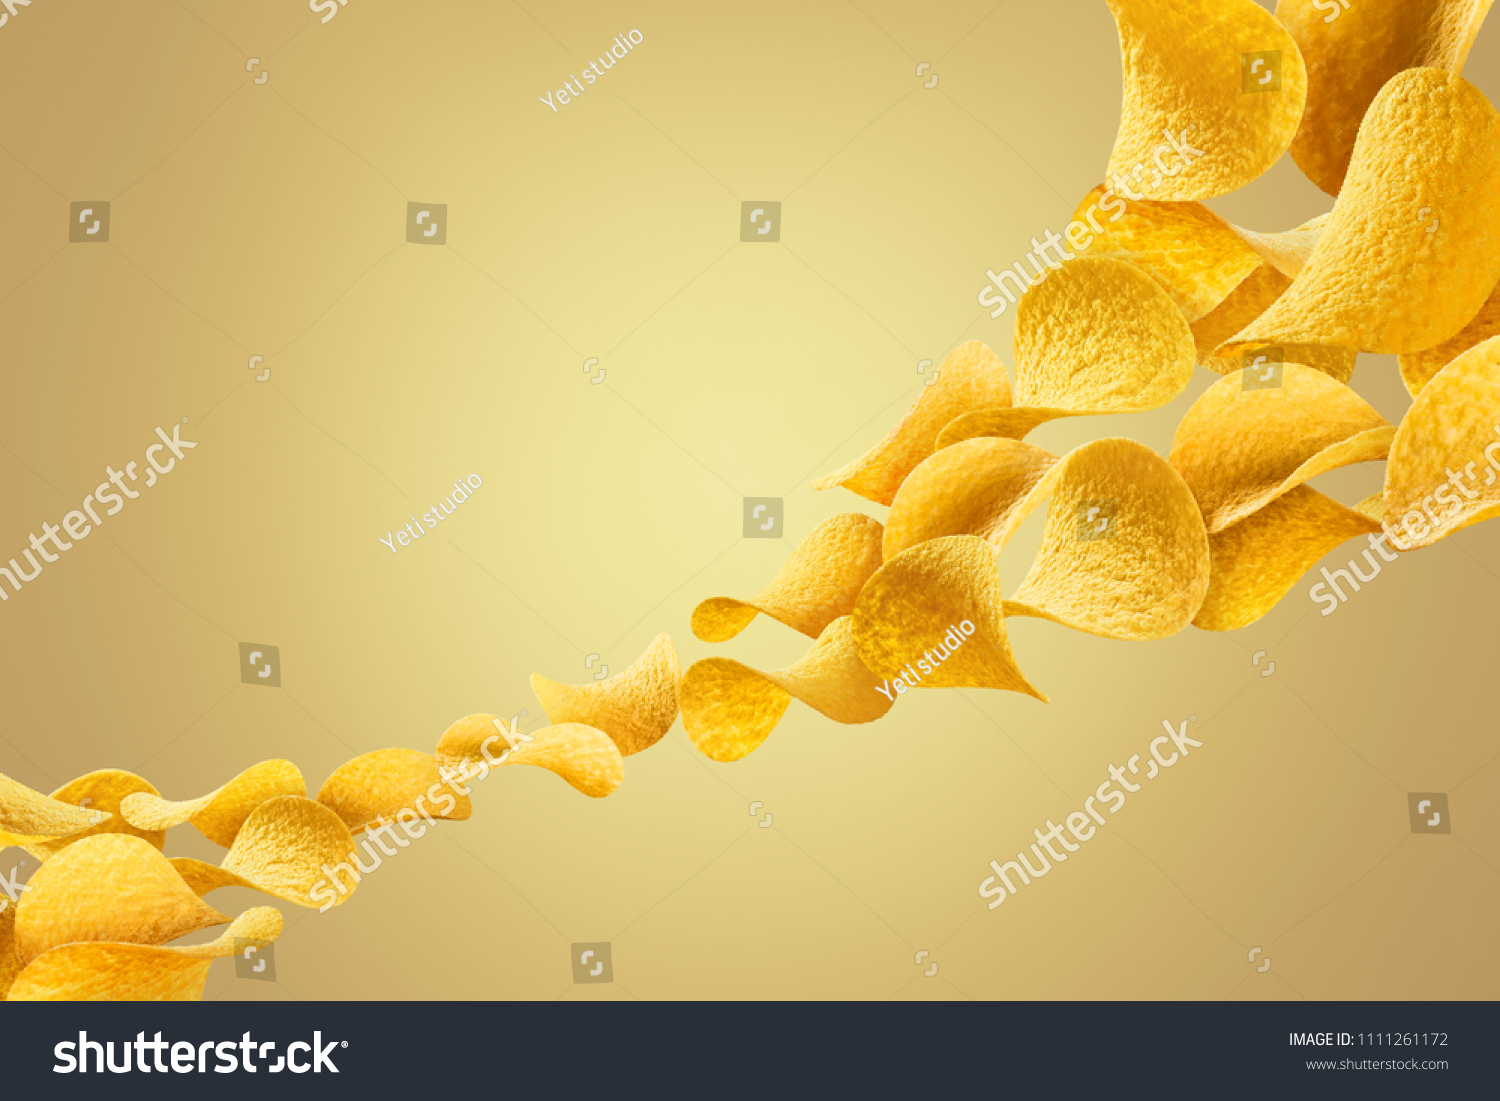 Flying potato chips, isolated on yellow gradient background #1111261172